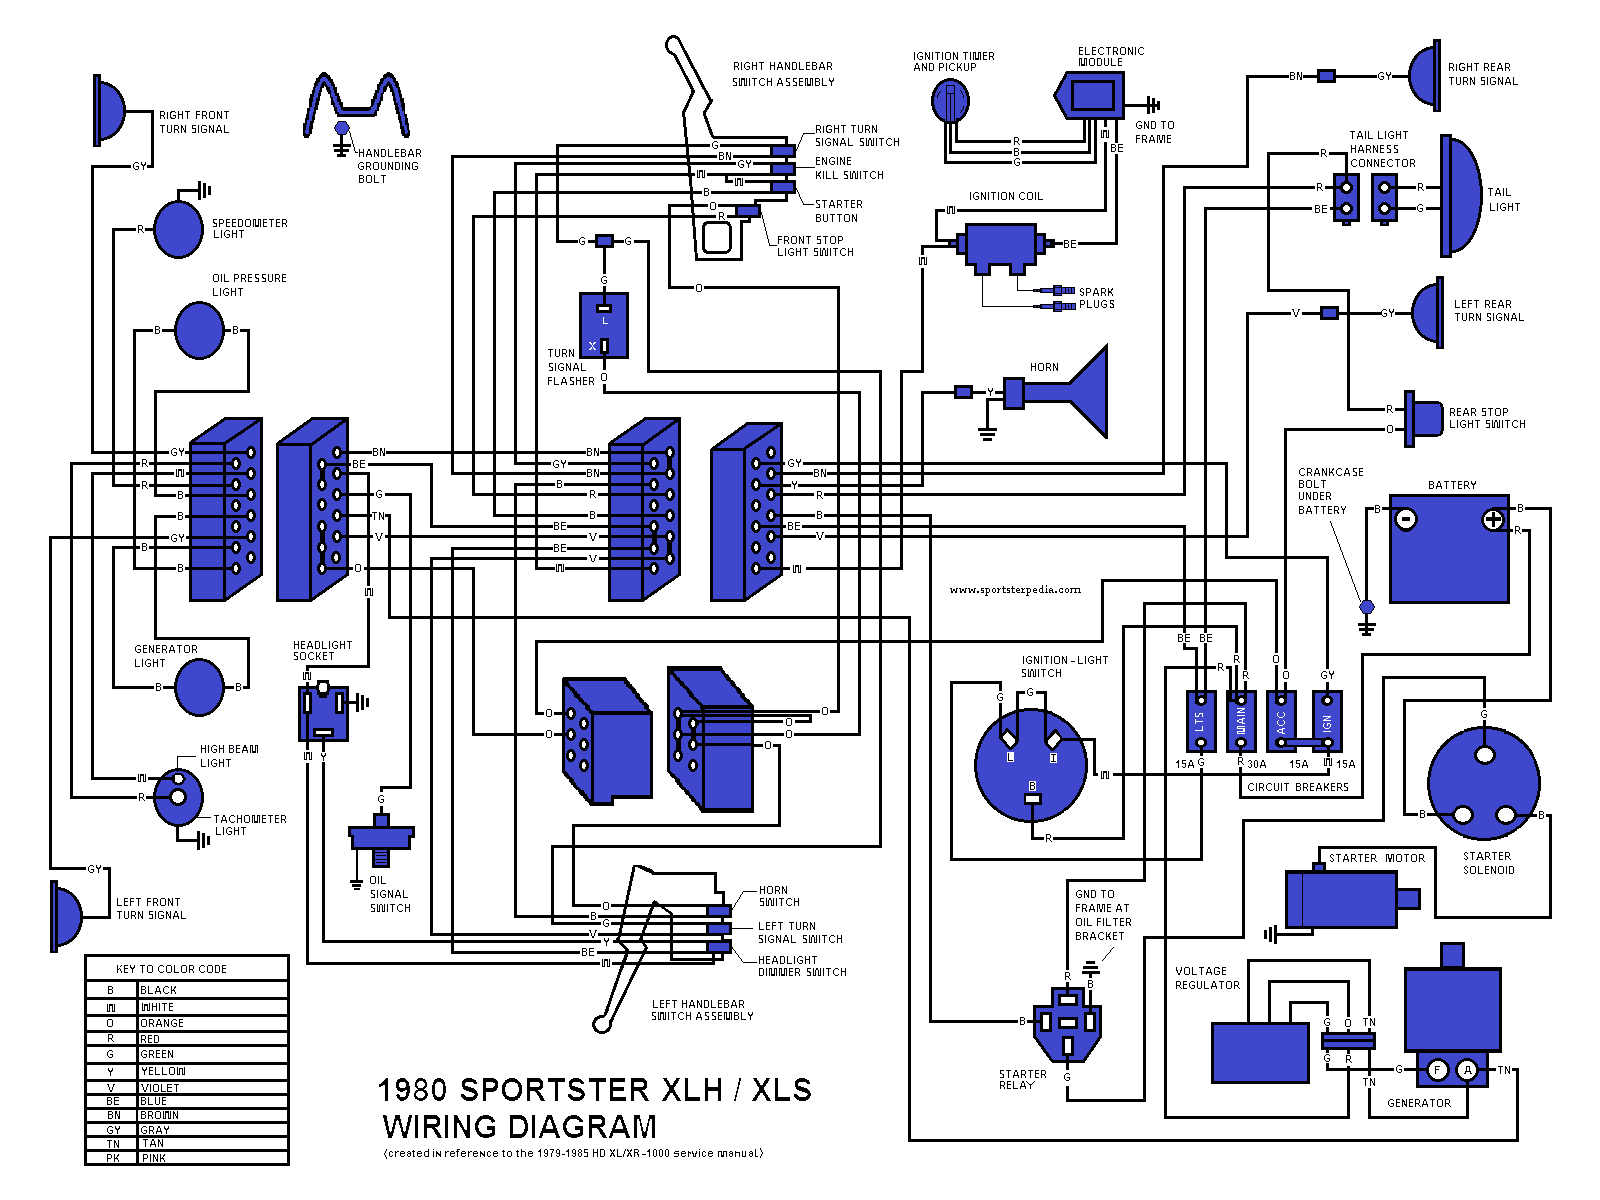 Ironhead Illustrated Wiring Diagrams - Page 2 - The Sportster and Buell  Motorcycle Forum - The XLFORUM® BMW E90 Wiring Schematics XL Forum